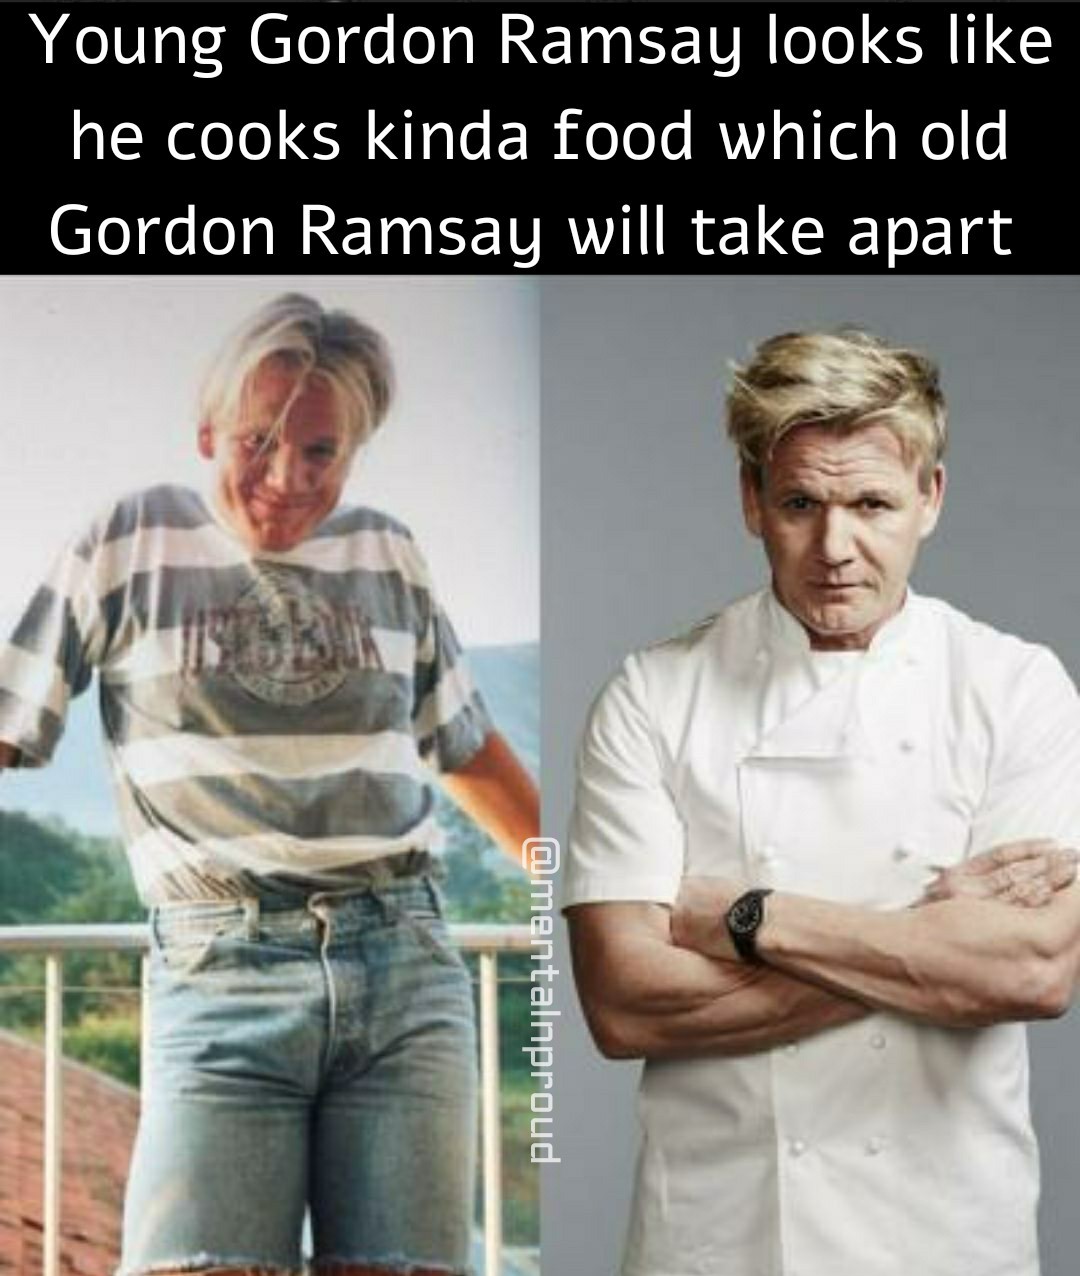 My favourite Ramsay insult of all time "You're so full of Shit, even your eyes are brown" - meme